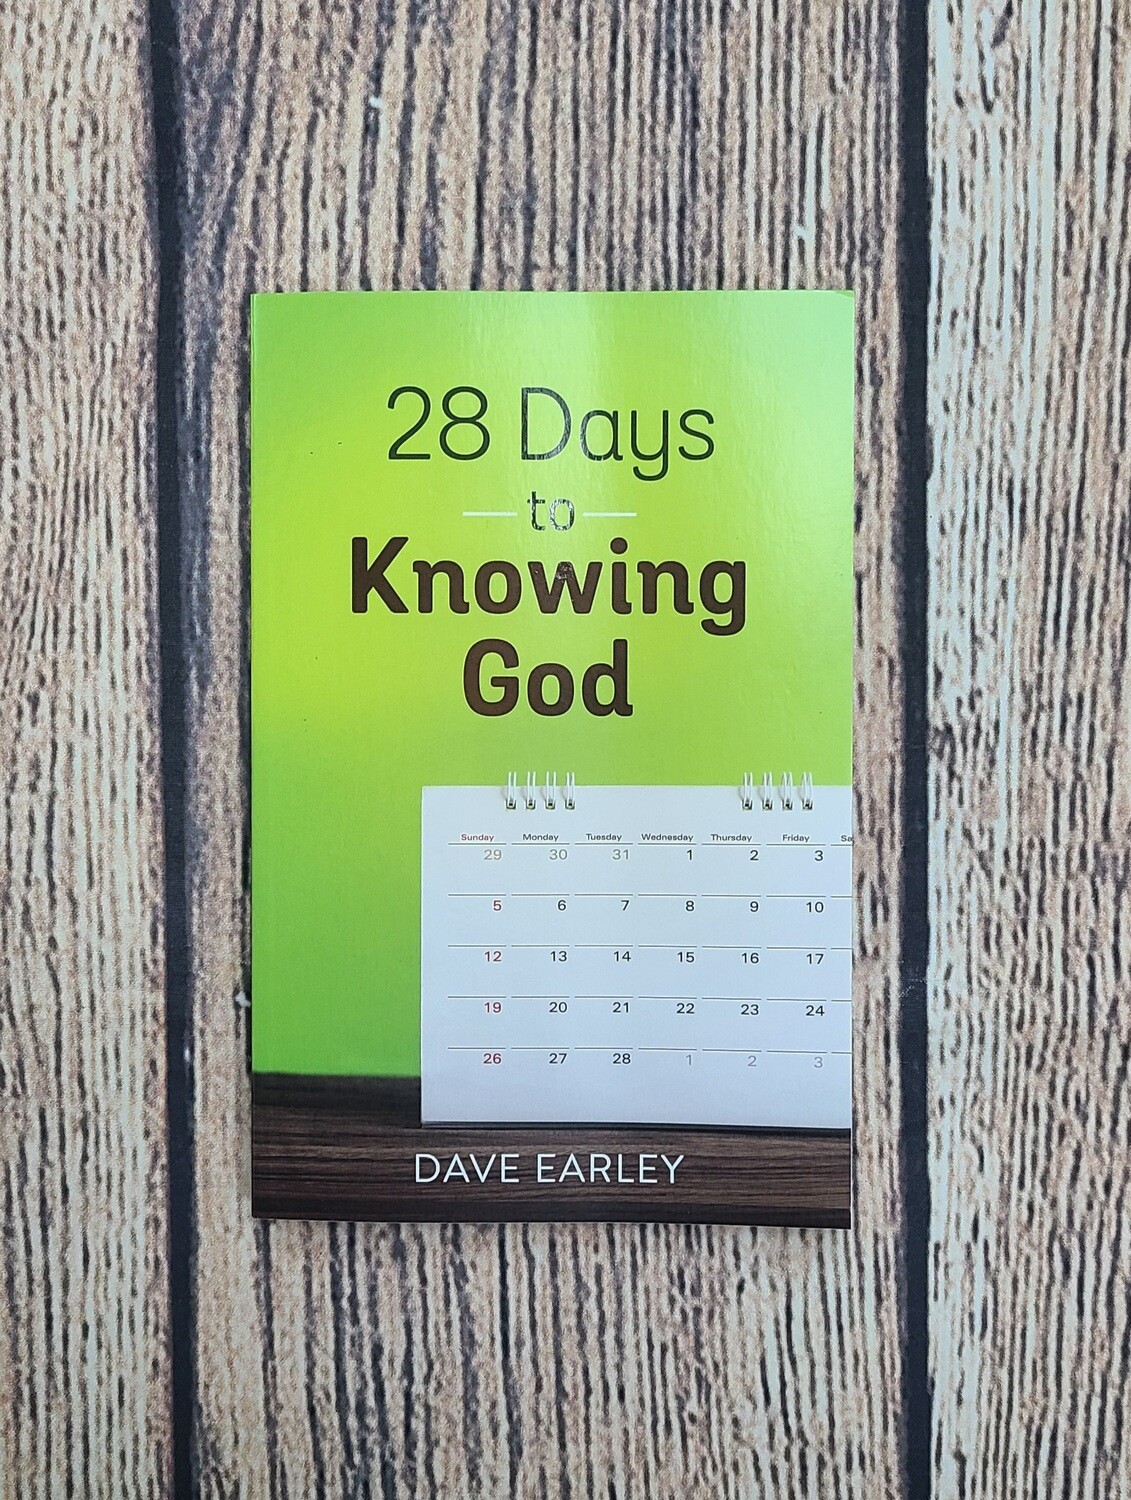 28 Days to Knowing God by Dave Earley